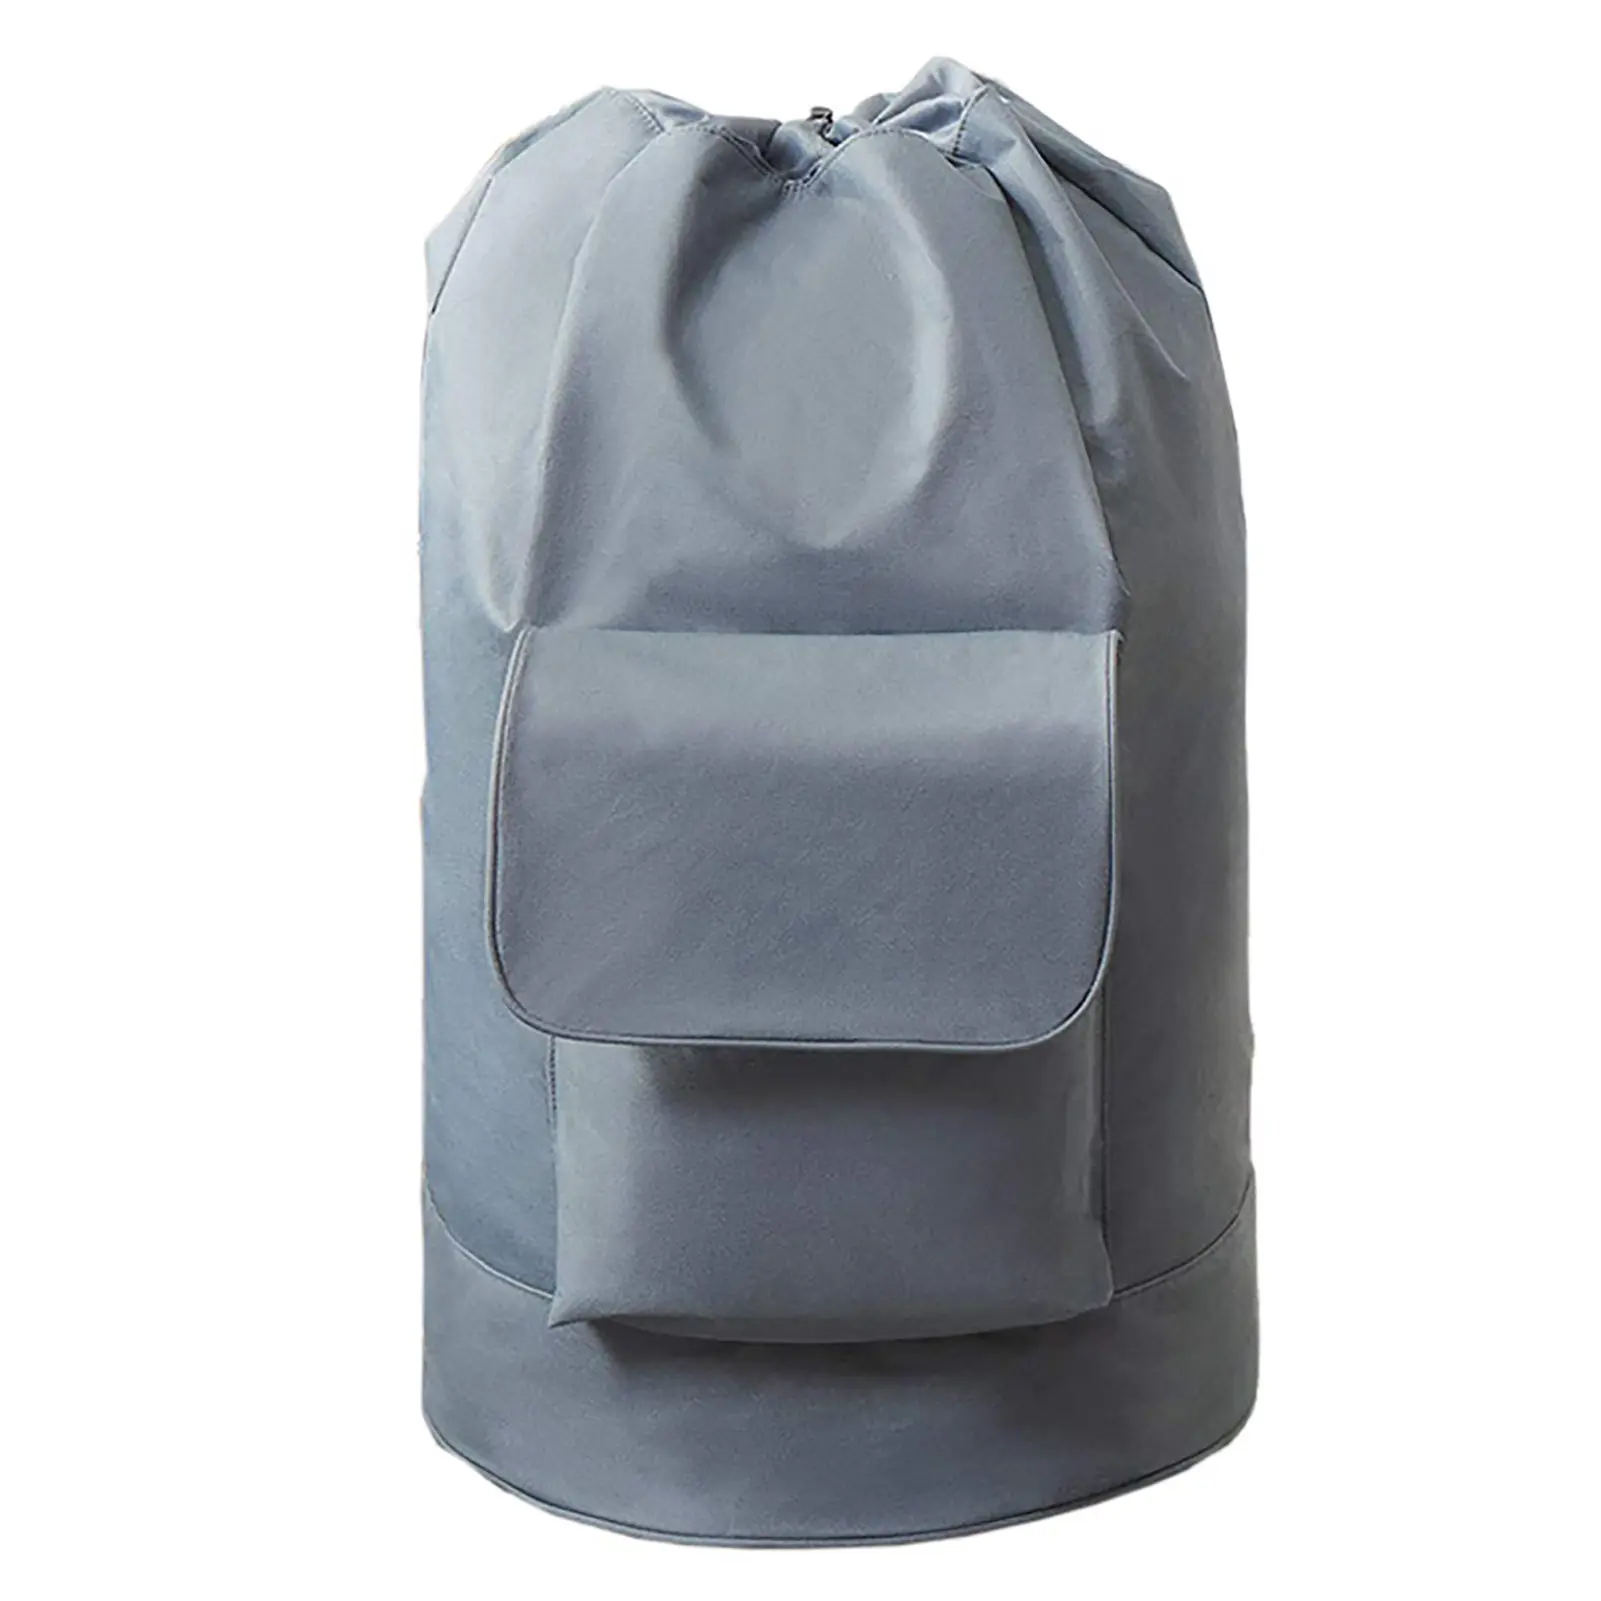 

Foldable Drawstring Closure Washing Machines Home Tear-resistant Laundry Bag Camping Travel Storage Backpack For Dirty Efficient